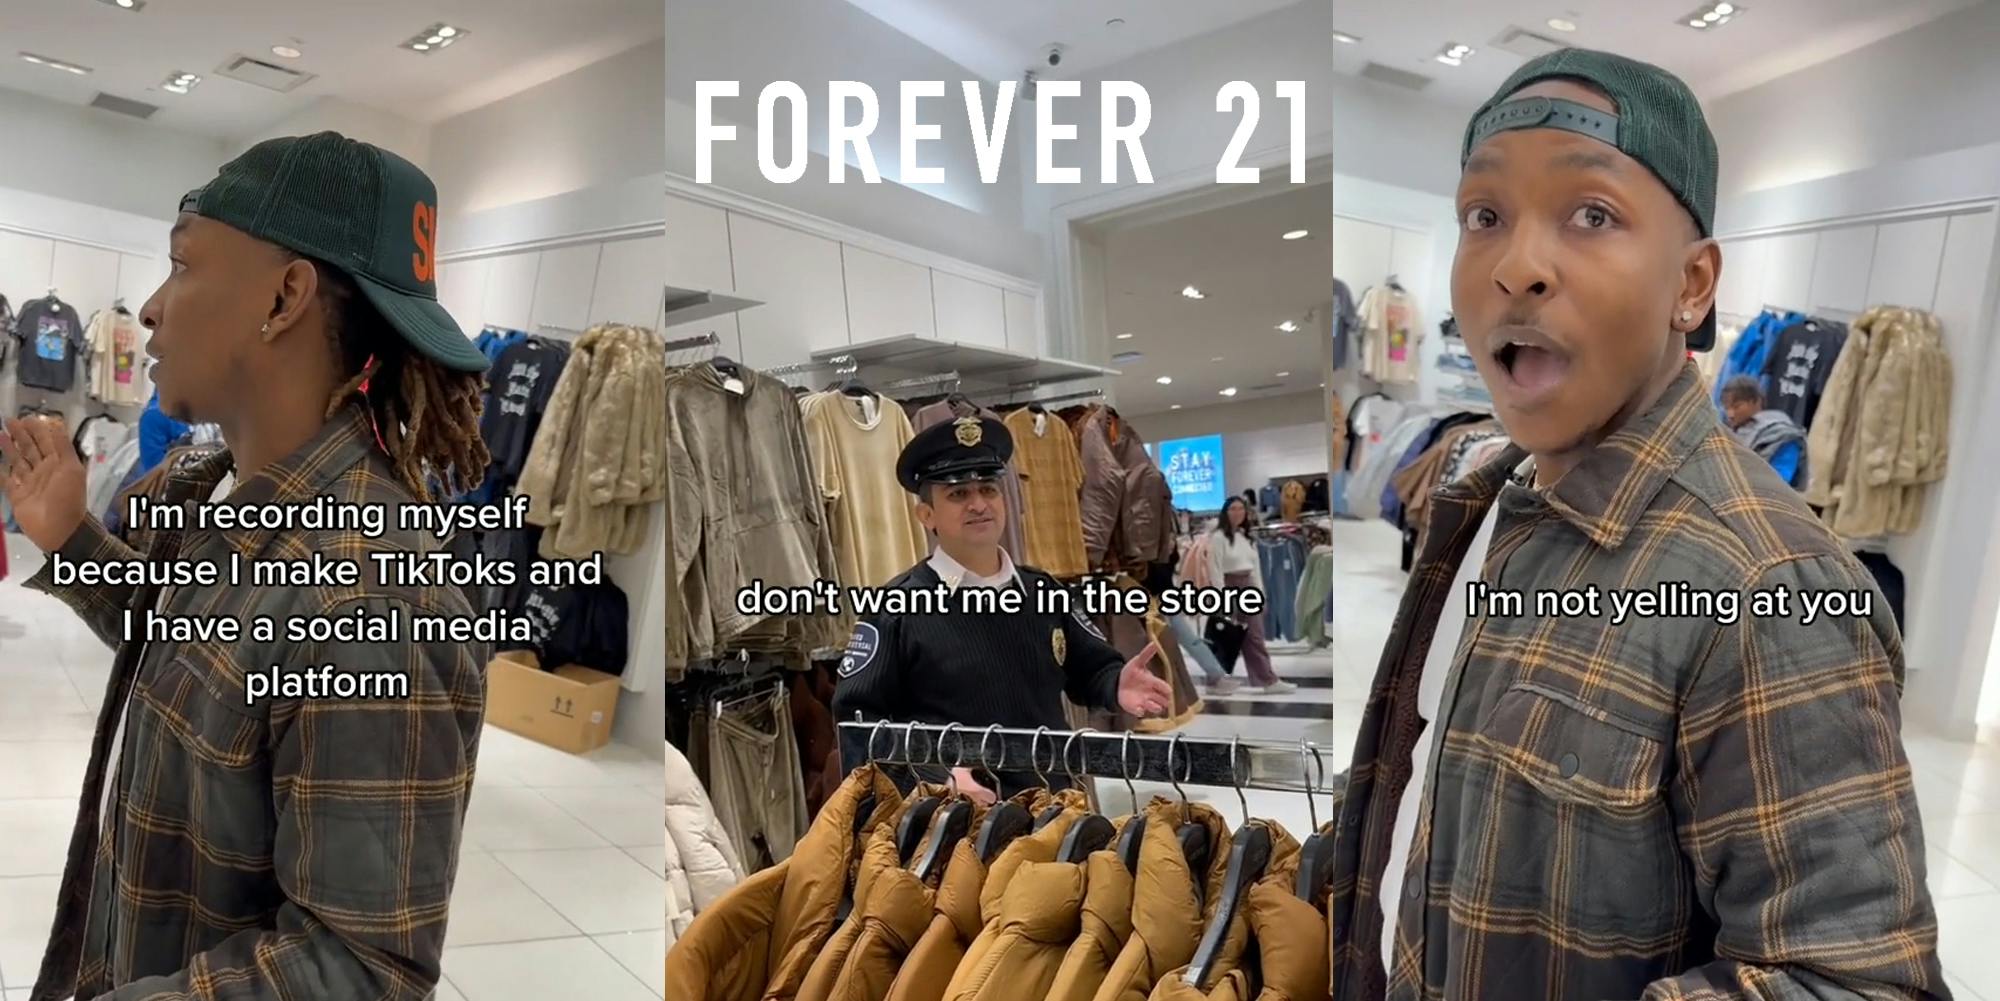 Man in Forever 21 store speaking caption "I'm recording myself because I make TikToks and I have a social media platform" (l) Police in Forever 21 with Forever 21 logo above caption "don't want me in the store" (c) man in Forever 21 store speaking caption "I'm not yelling at you" (r)